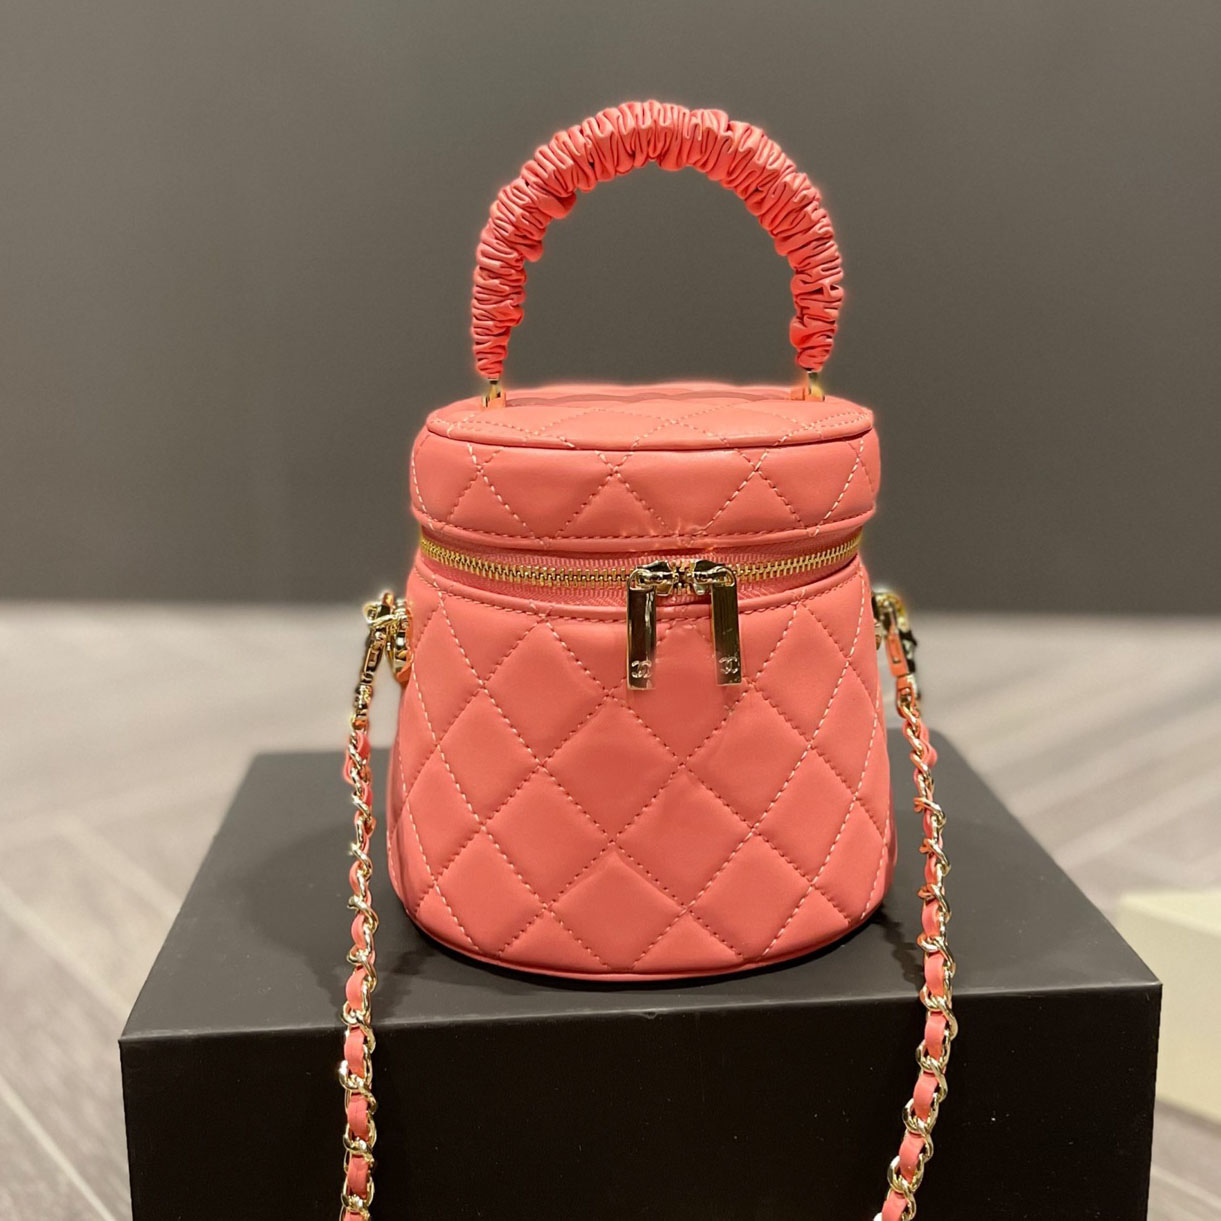 Women Cute Mini Pink Bucket Shoulder Bags Size13x14cm Famous Brand Fashion Chain Small Mobile Purses Thread Lovely Crossbody Hand Bag Top Handle Handbags Wallet